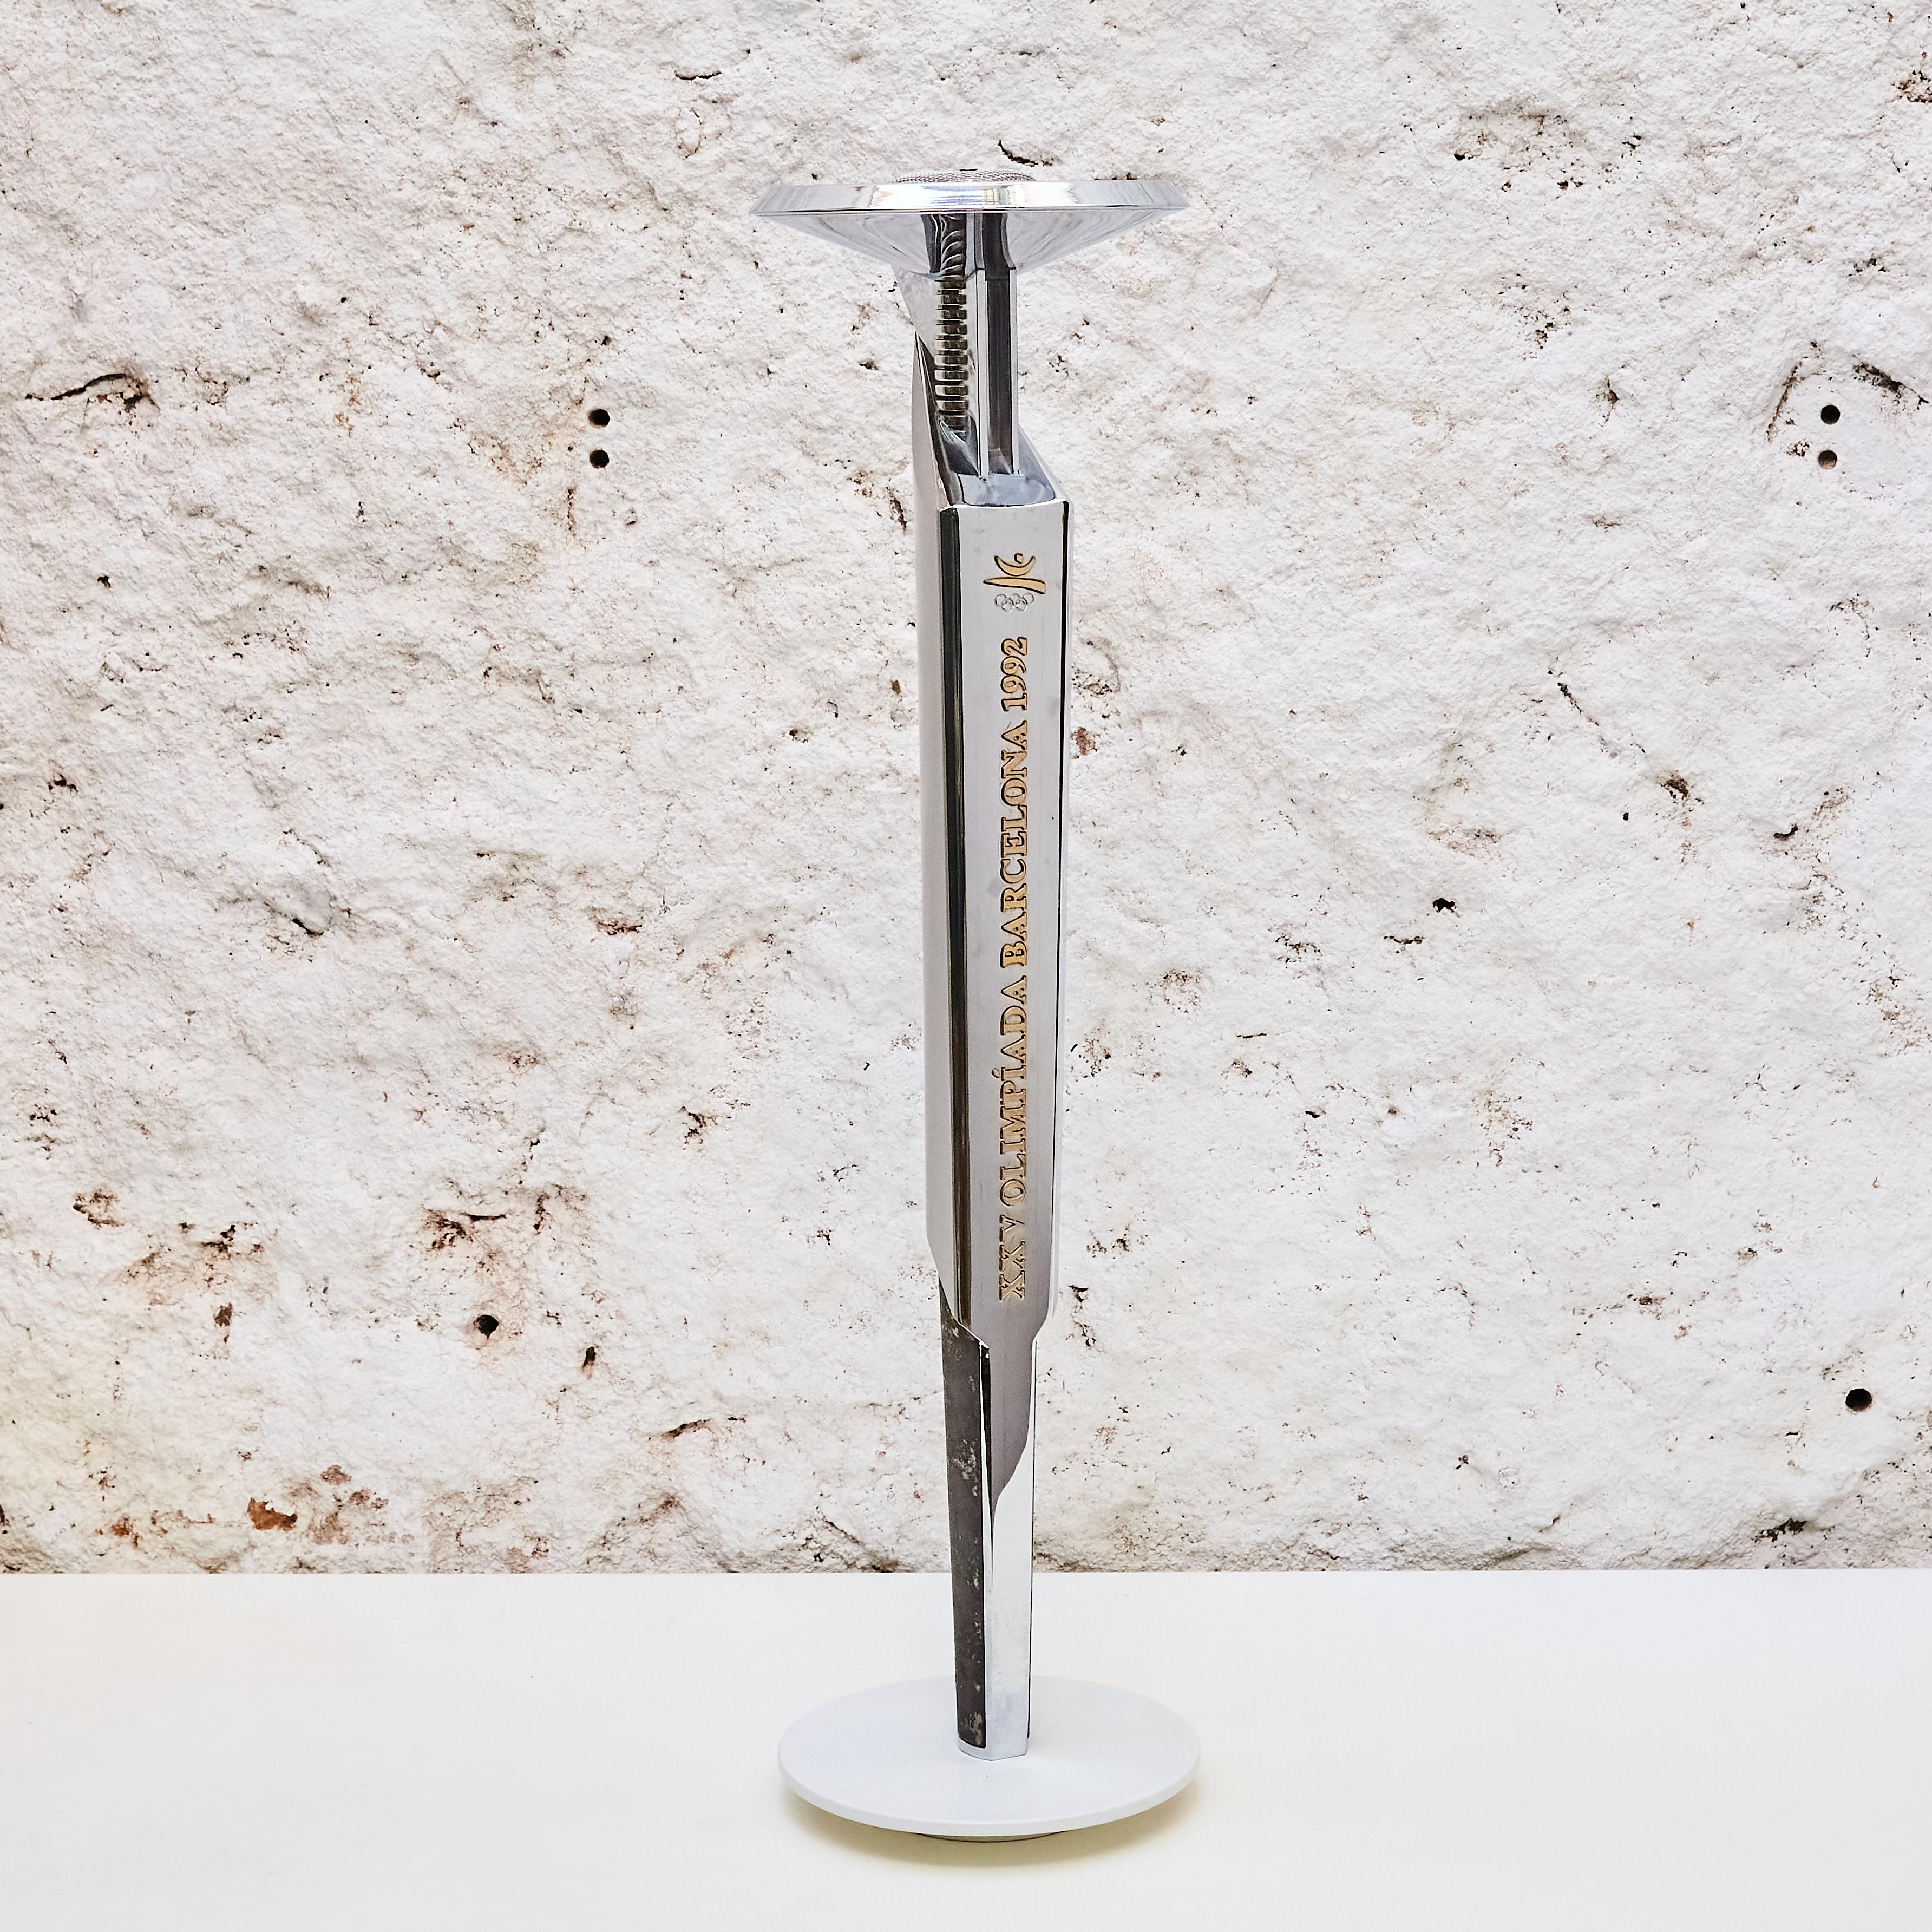 André Ricard 'Olympic Torch Prototype' for Barcelona 1992 Games, circa 1992 For Sale 2